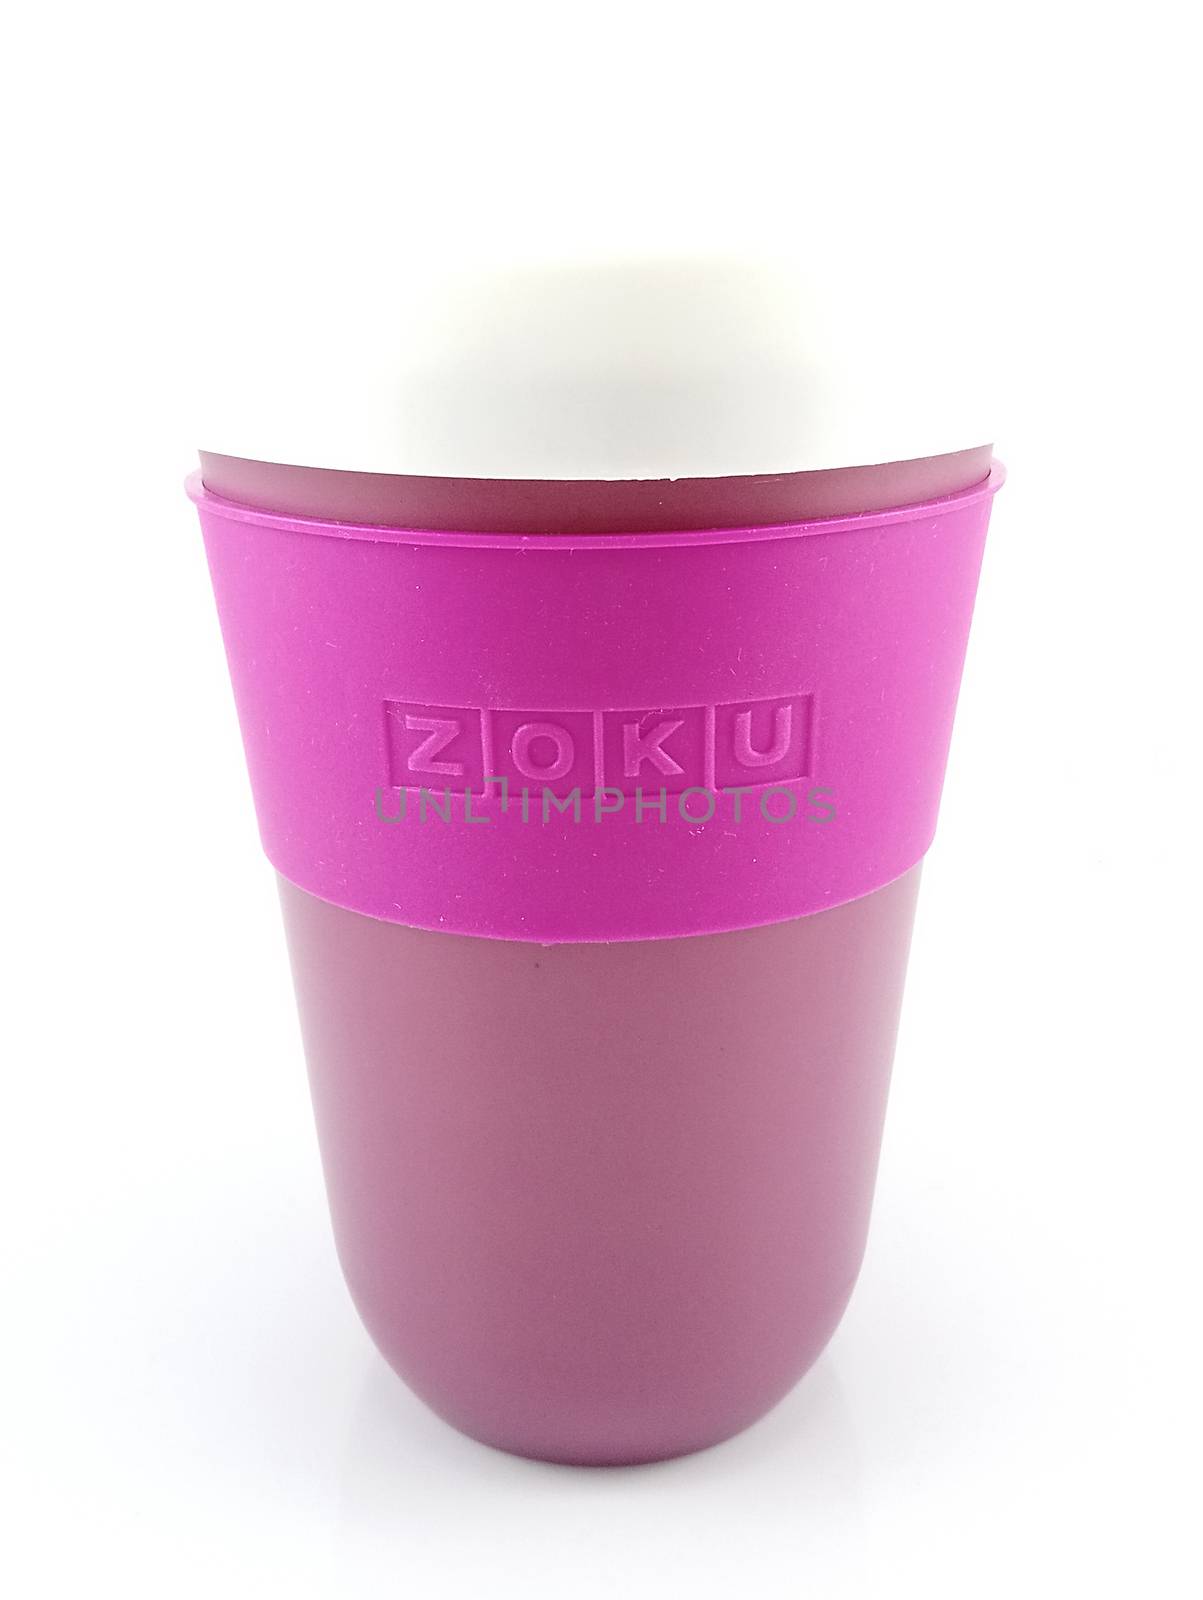 MANILA, PH - SEPT 20 - Zoku slush and shake maker cup on September 20, 2018 in Manila, Philippines. Zoku brand is a manufacturer of slush and shake maker product.